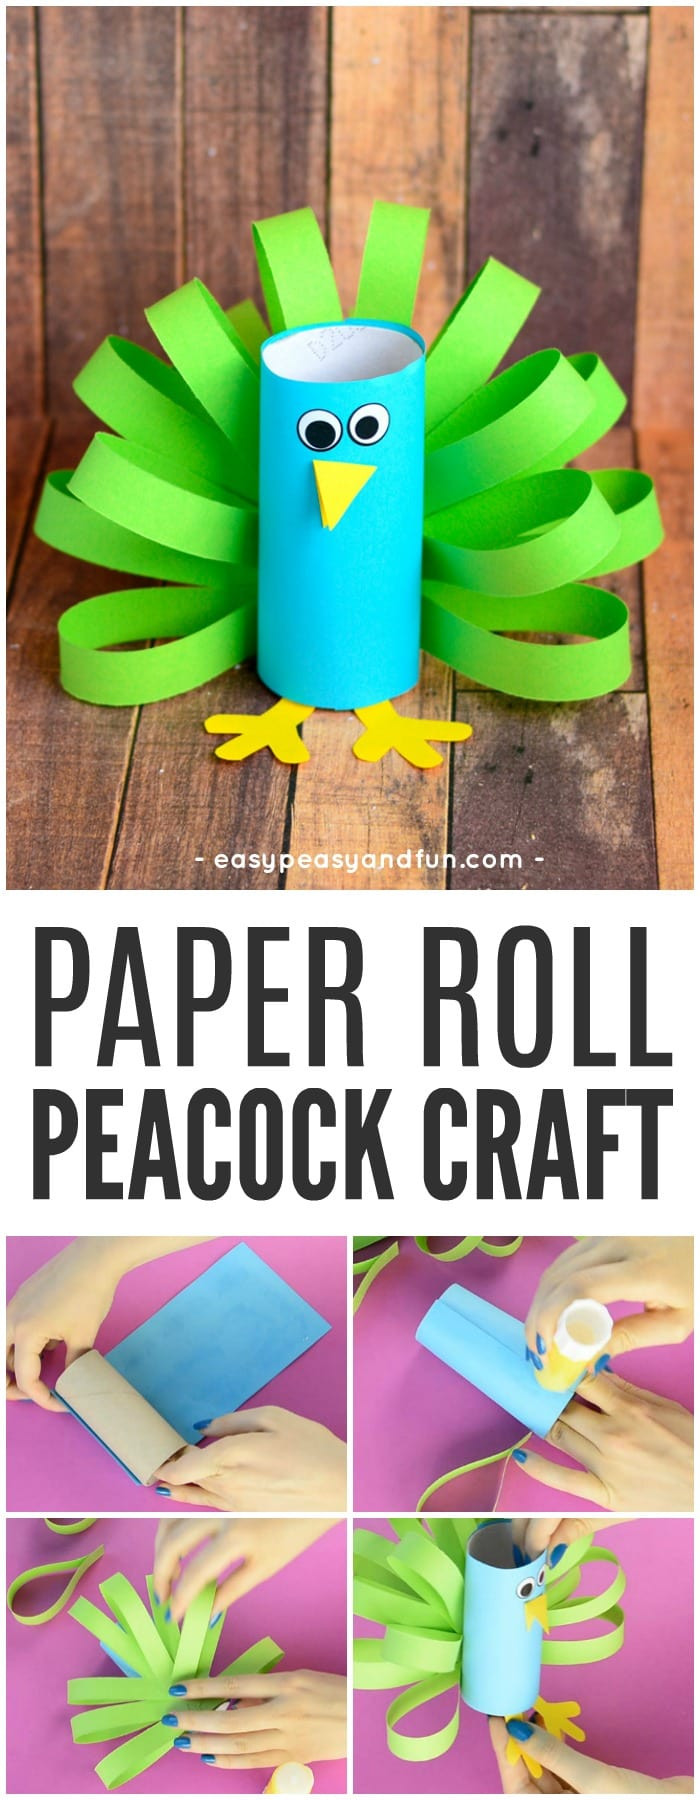 Craft Project For Toddler
 Toilet Paper Roll Peacock Craft Idea Easy Peasy and Fun